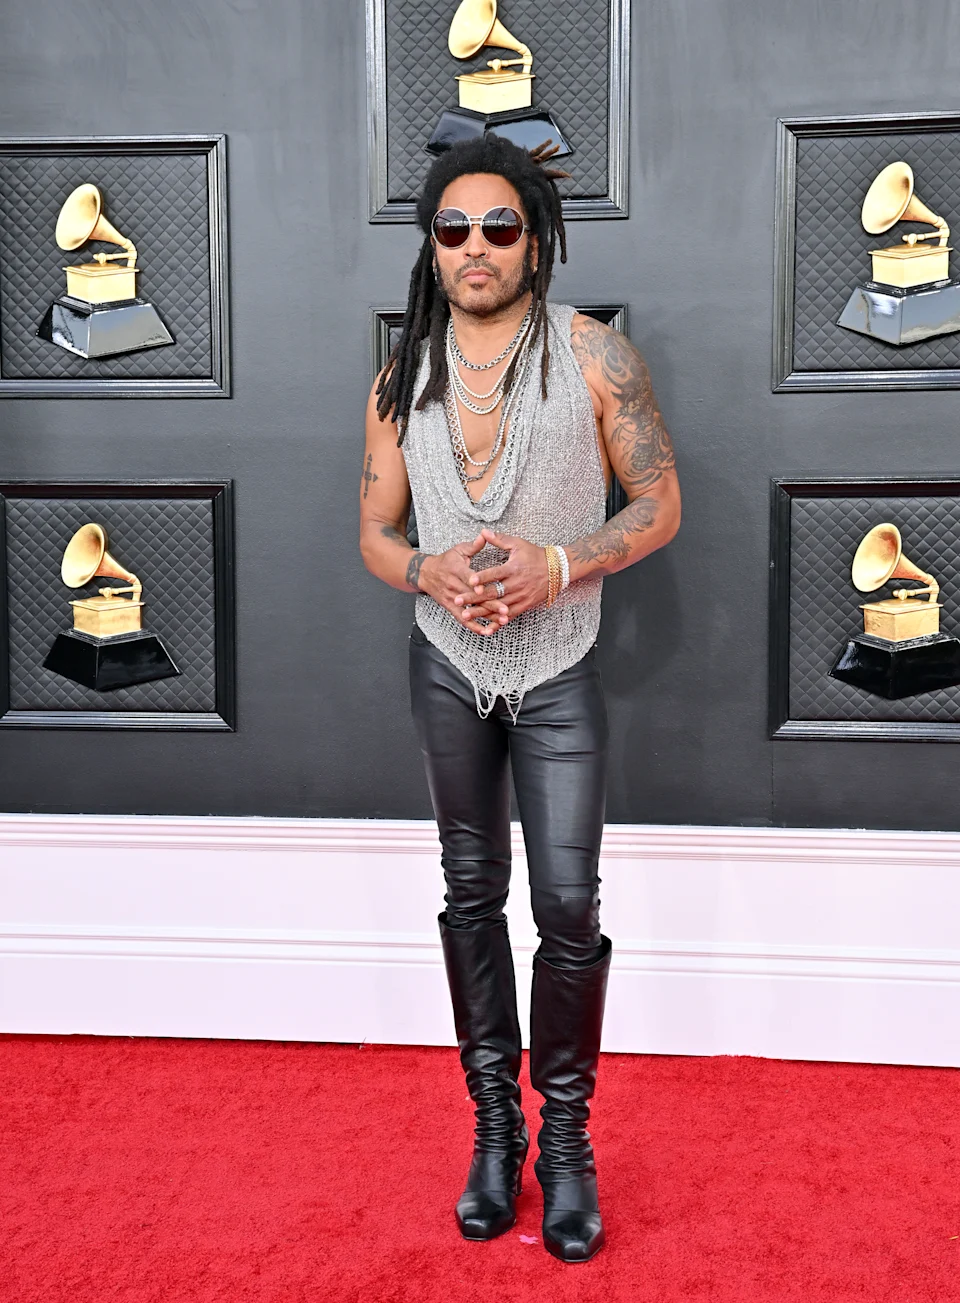 Lenny Kravitz wears Sheer Silver Chainmail Top @ Grammy 2022